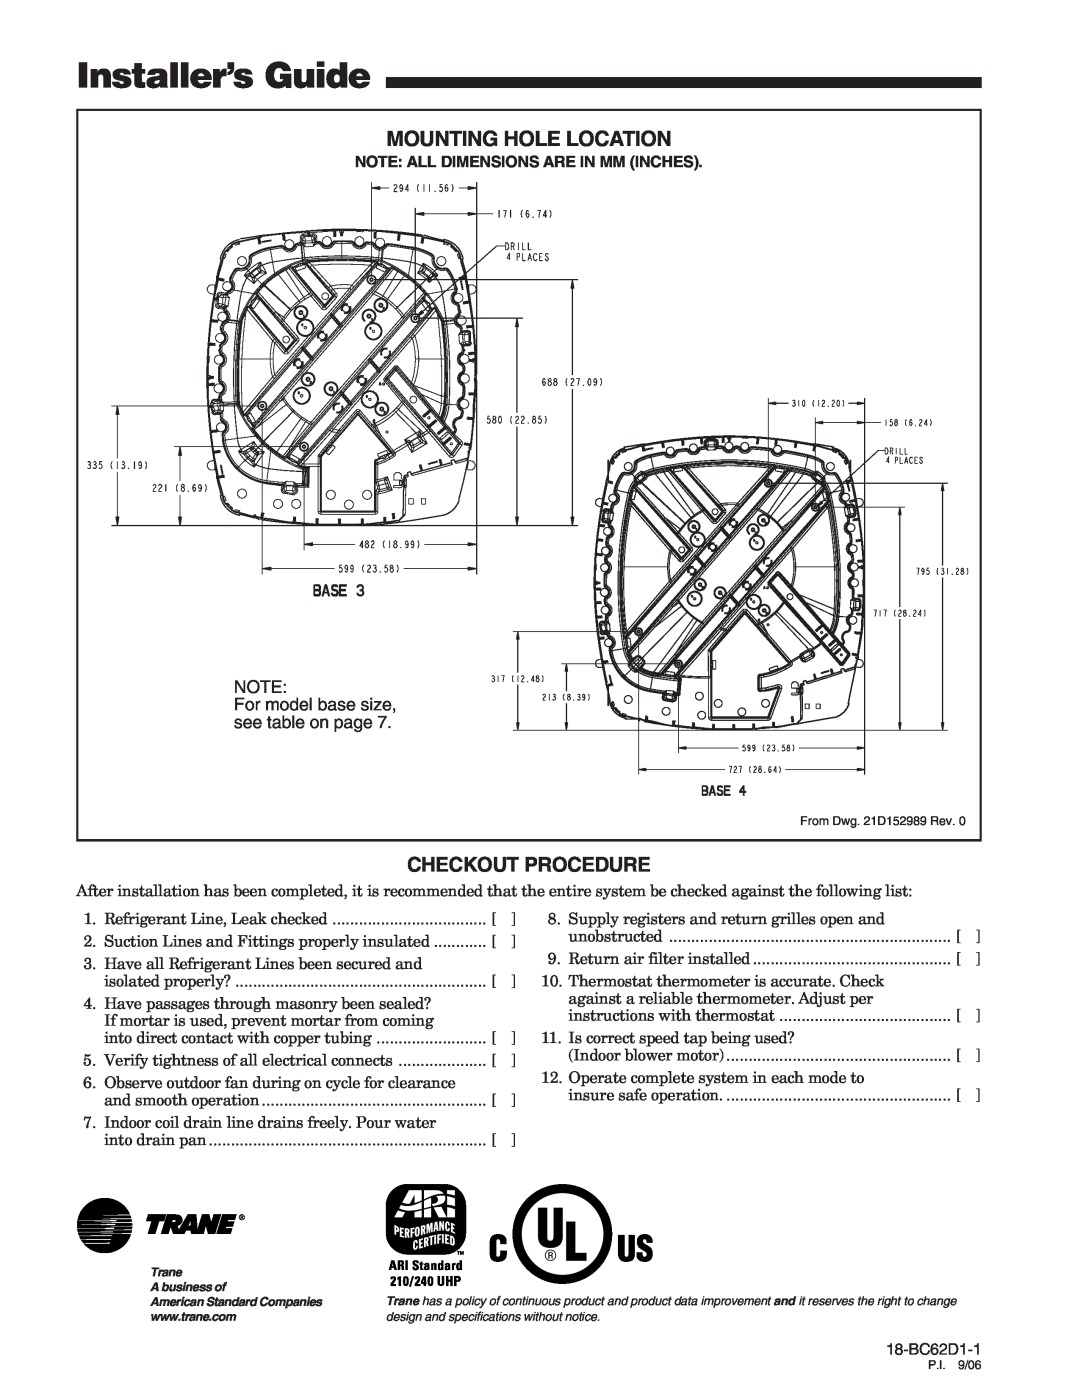 Trane 4TWA3 manual Installer’s Guide, Mounting Hole Location, Checkout Procedure, For model base size, see table on page 